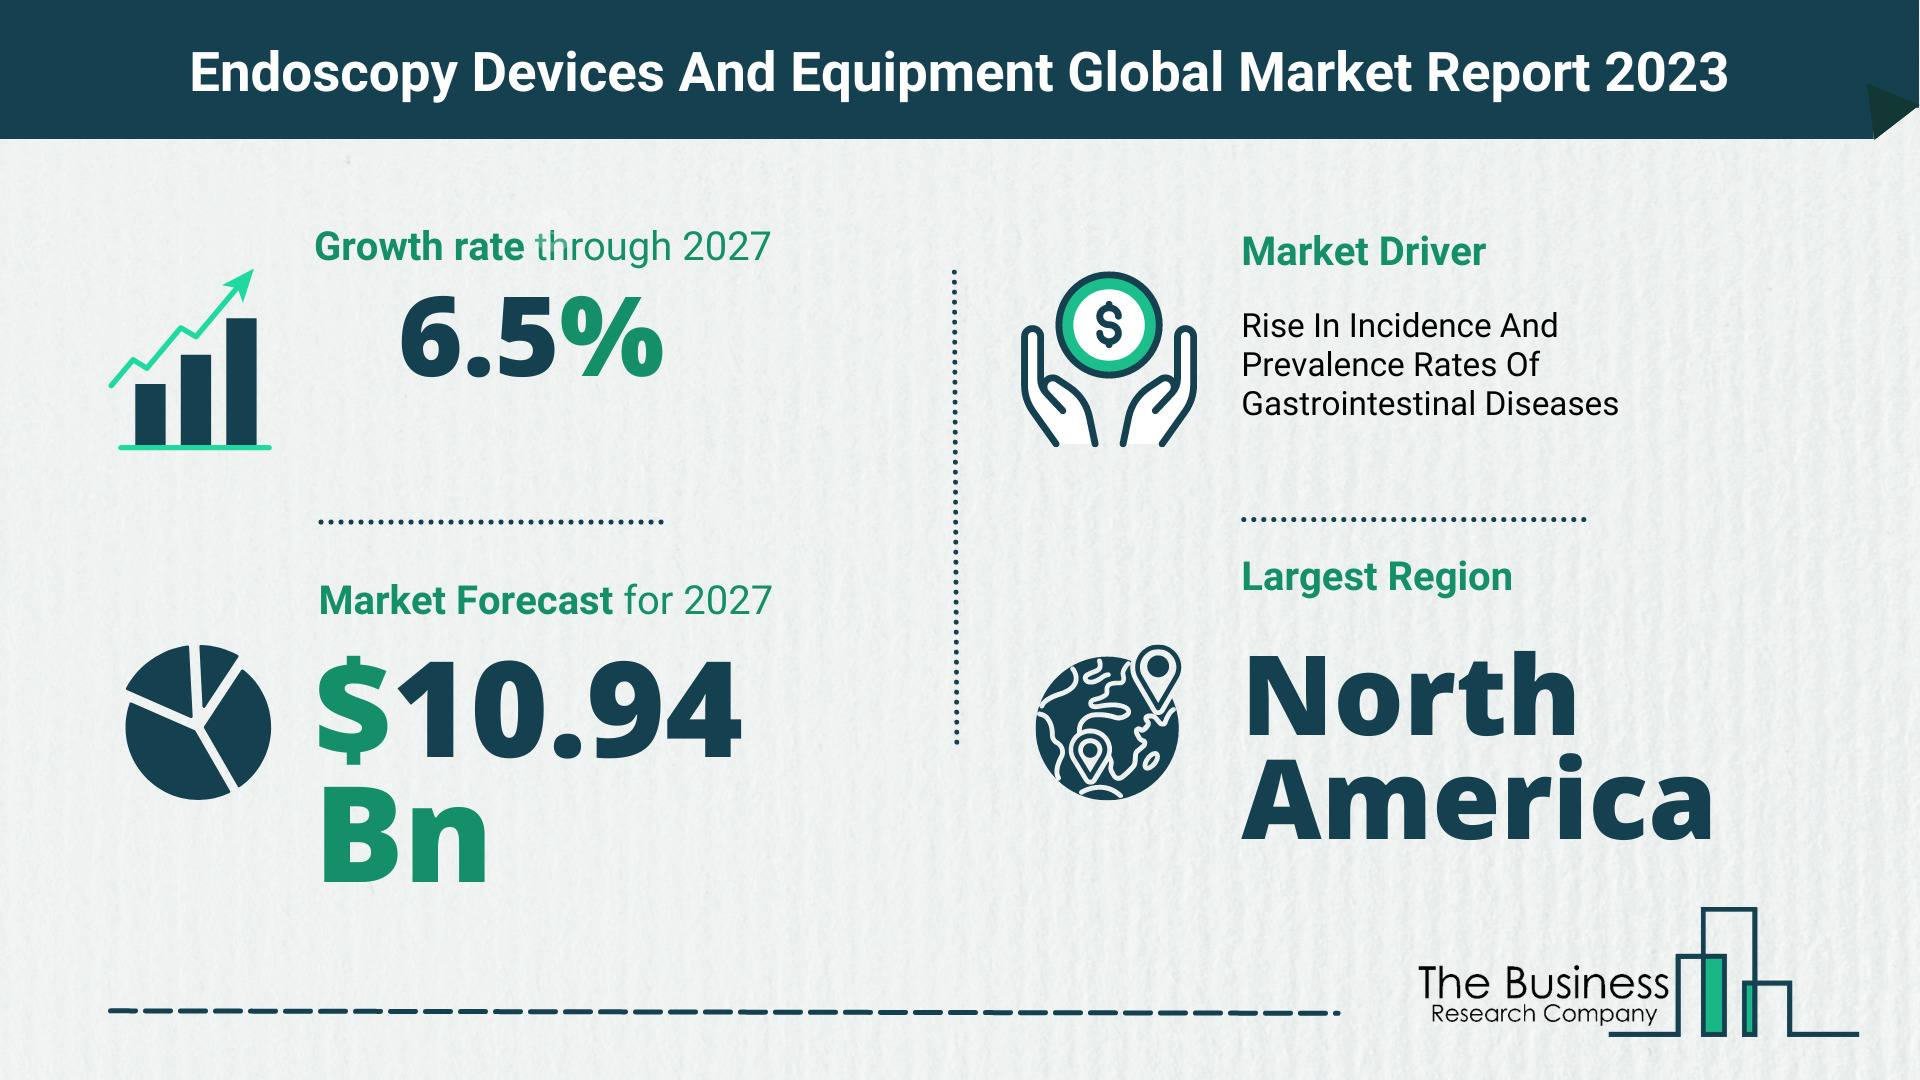 Global Endoscopy Devices And Equipment Market,